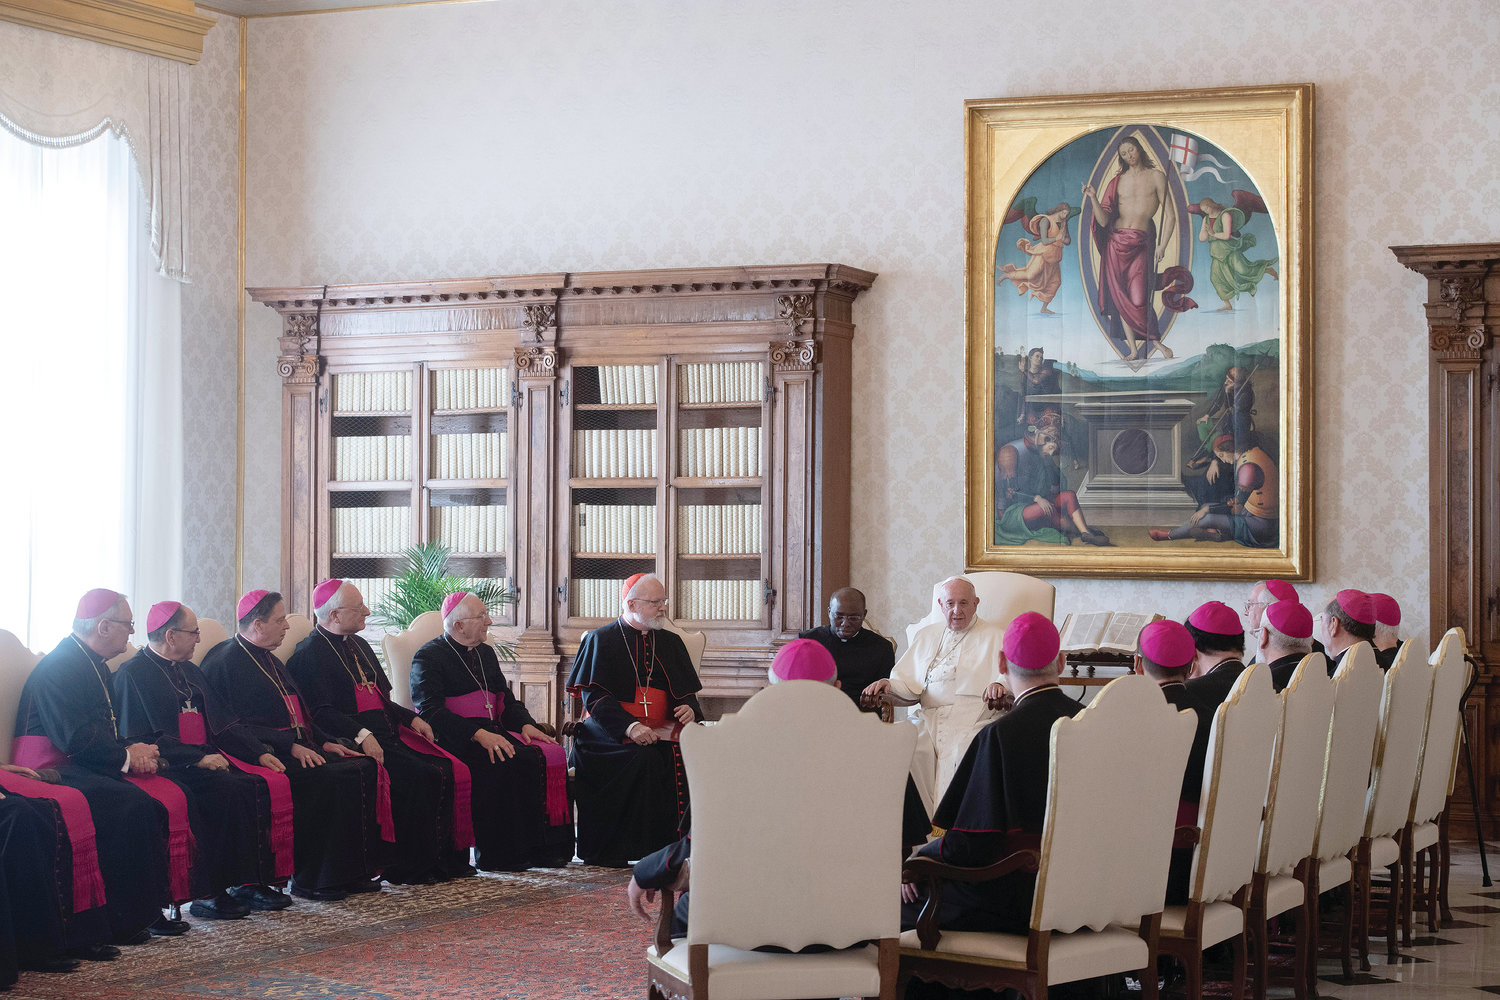 Pope Francis meets with U.S. bishops from the New England States at the Vatican Nov. 7, 2019. The bishops were making their "ad limina" visits to the Vatican to report on the status of their dioceses to the pope and Vatican officials. (CNS photo/Vatican Media) See ADLIMINA-ONE-STPETER and POPE-ADLIMINA-ONE Nov. 8, 2019.